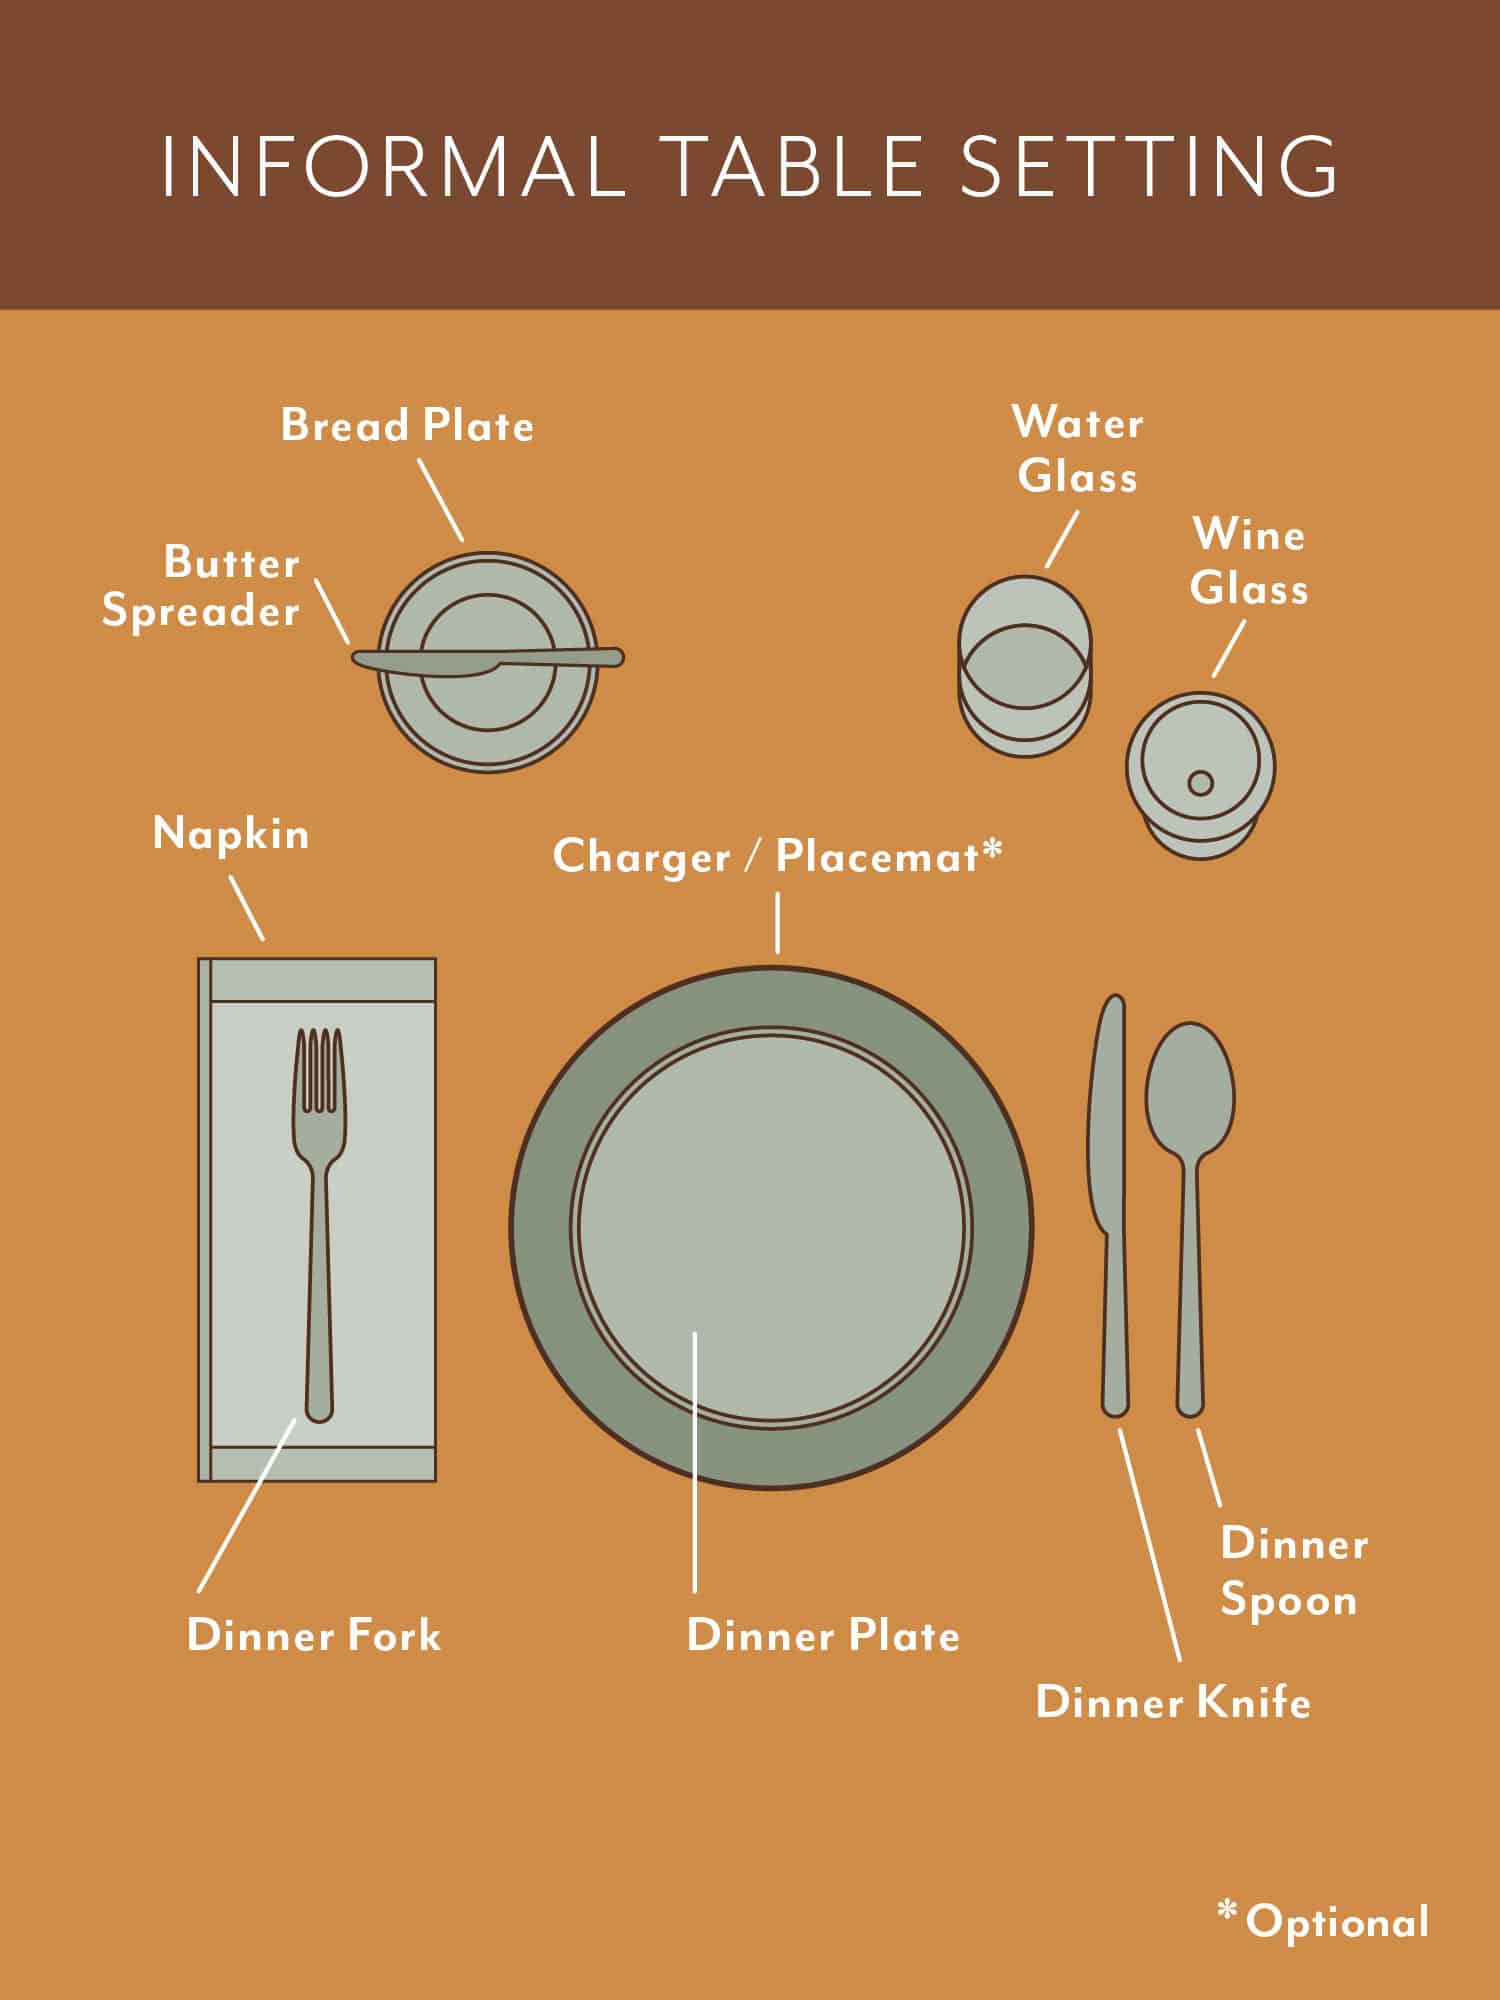 How to set an informal Thanksgiving table